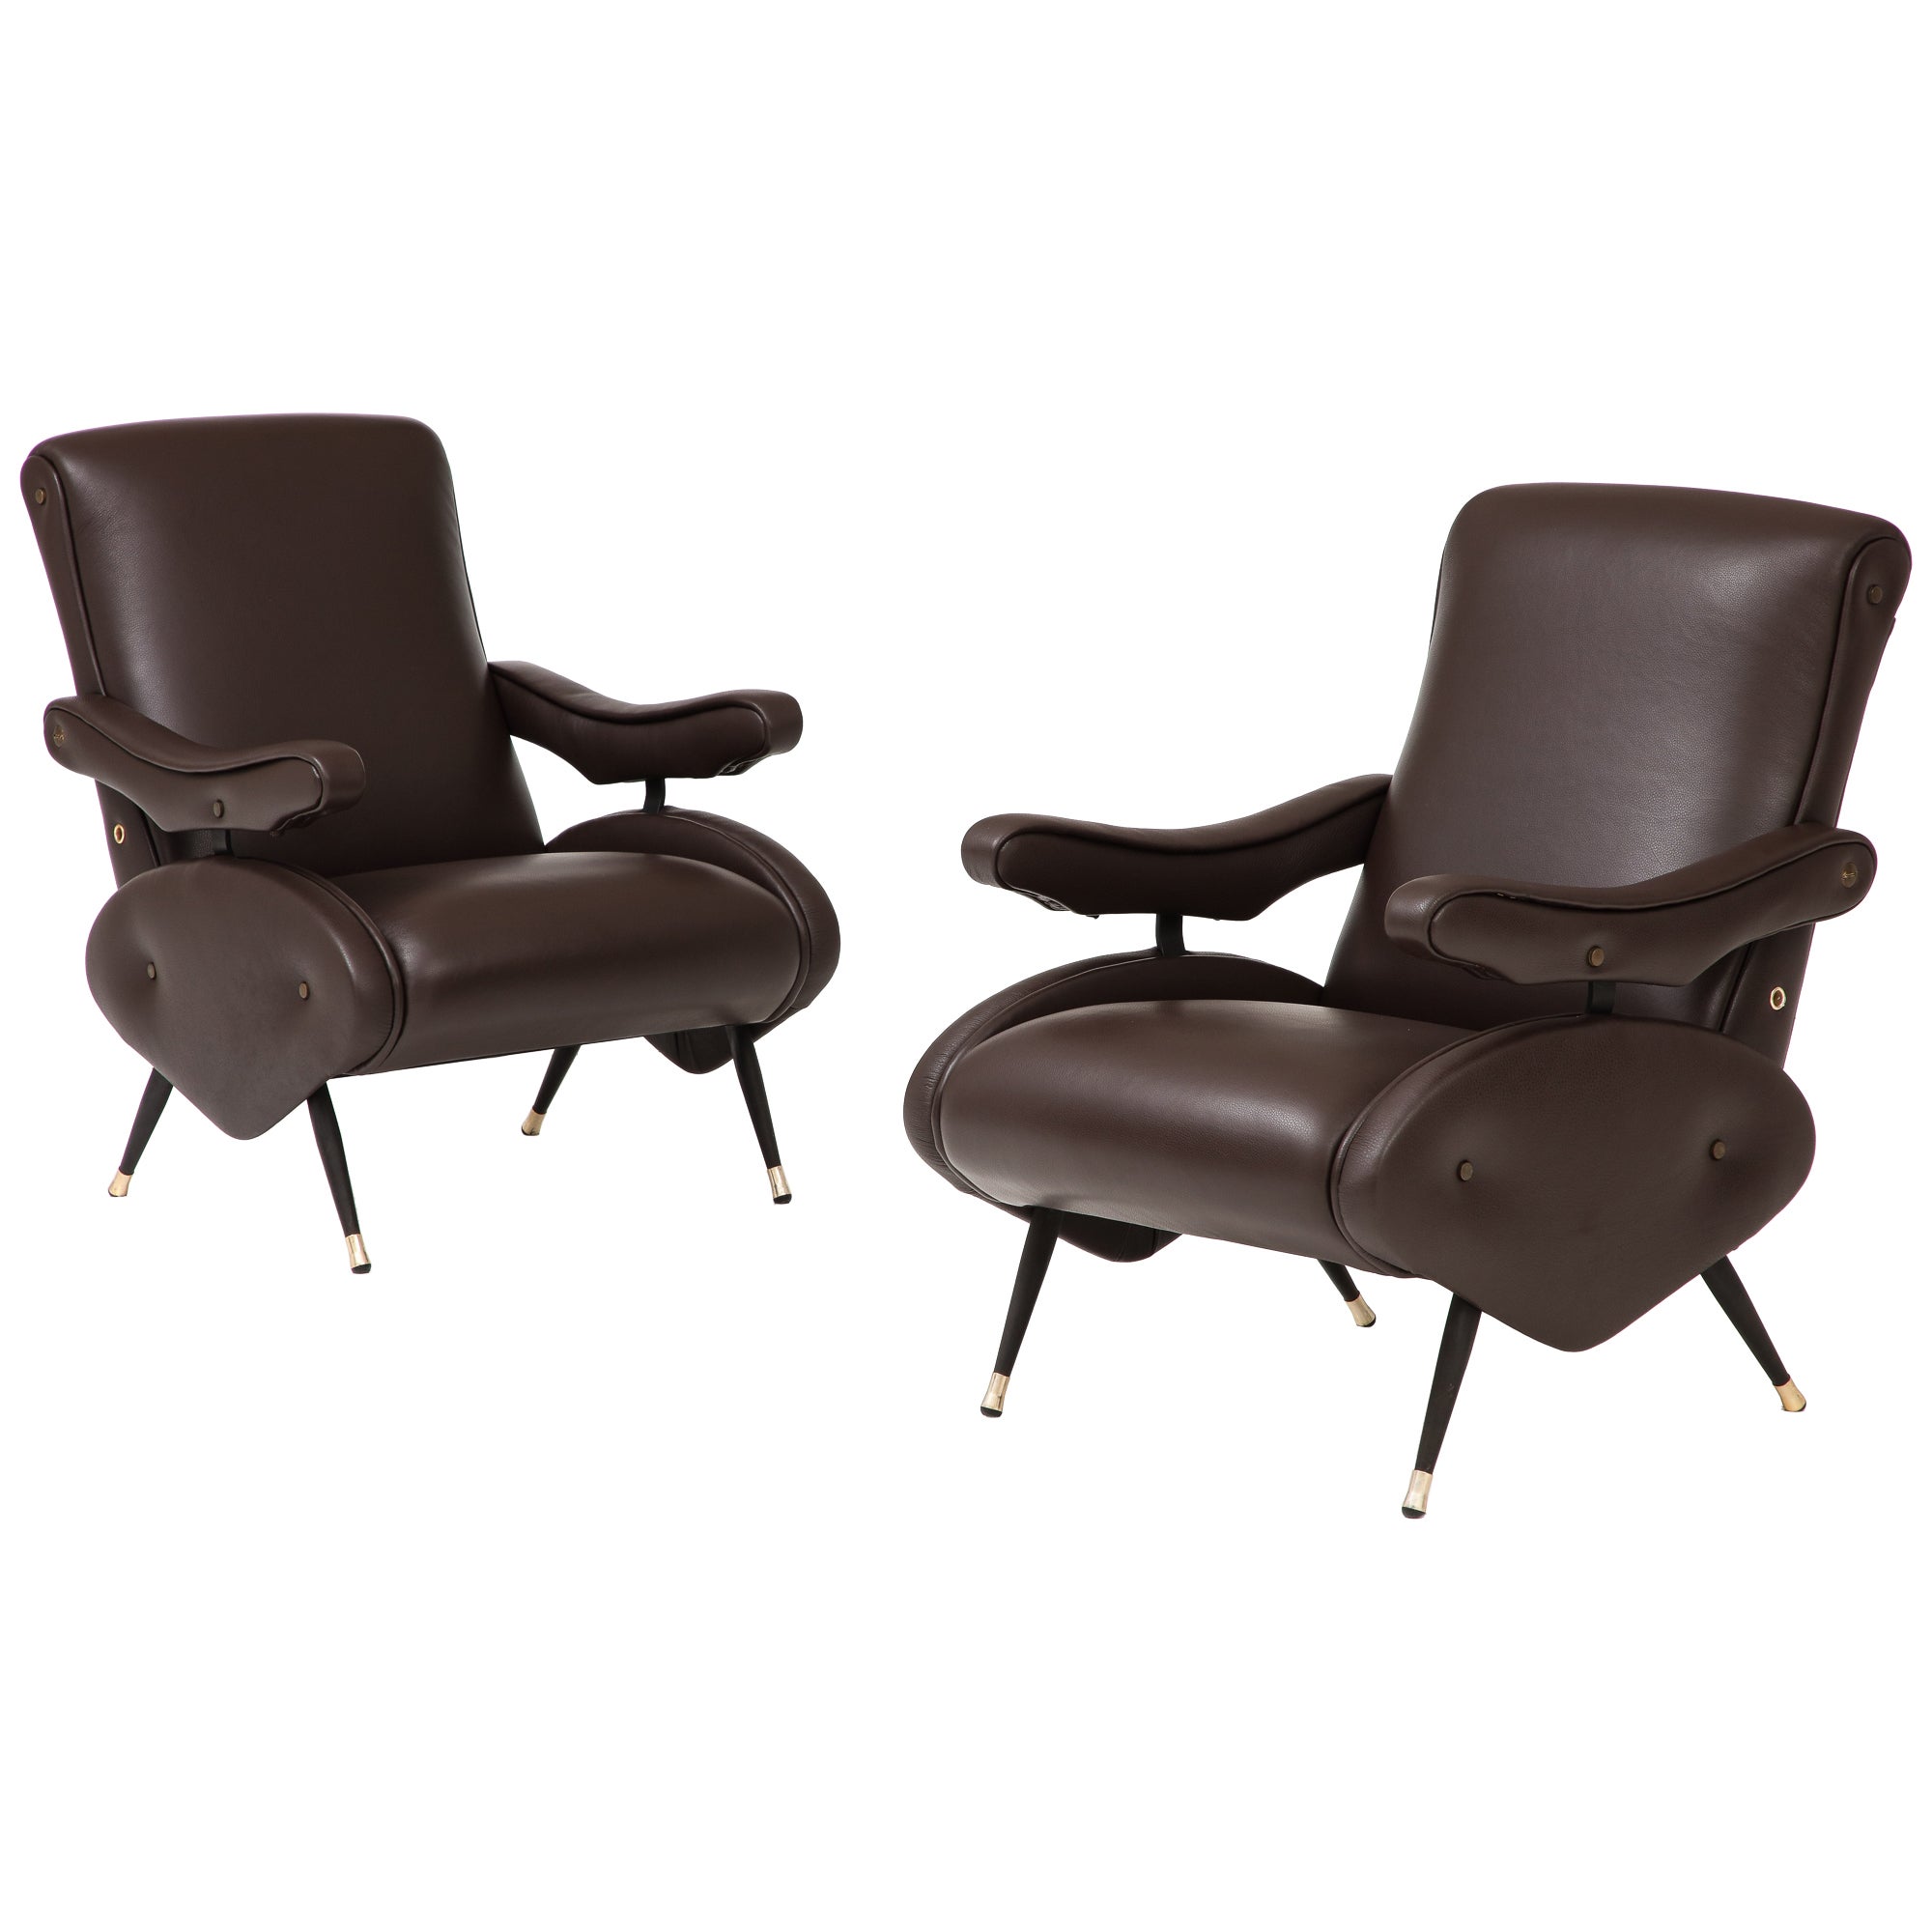 Nello Pini for Novarredo, Pair of Reclining Leather Lounge Chairs, Italy 1959  For Sale